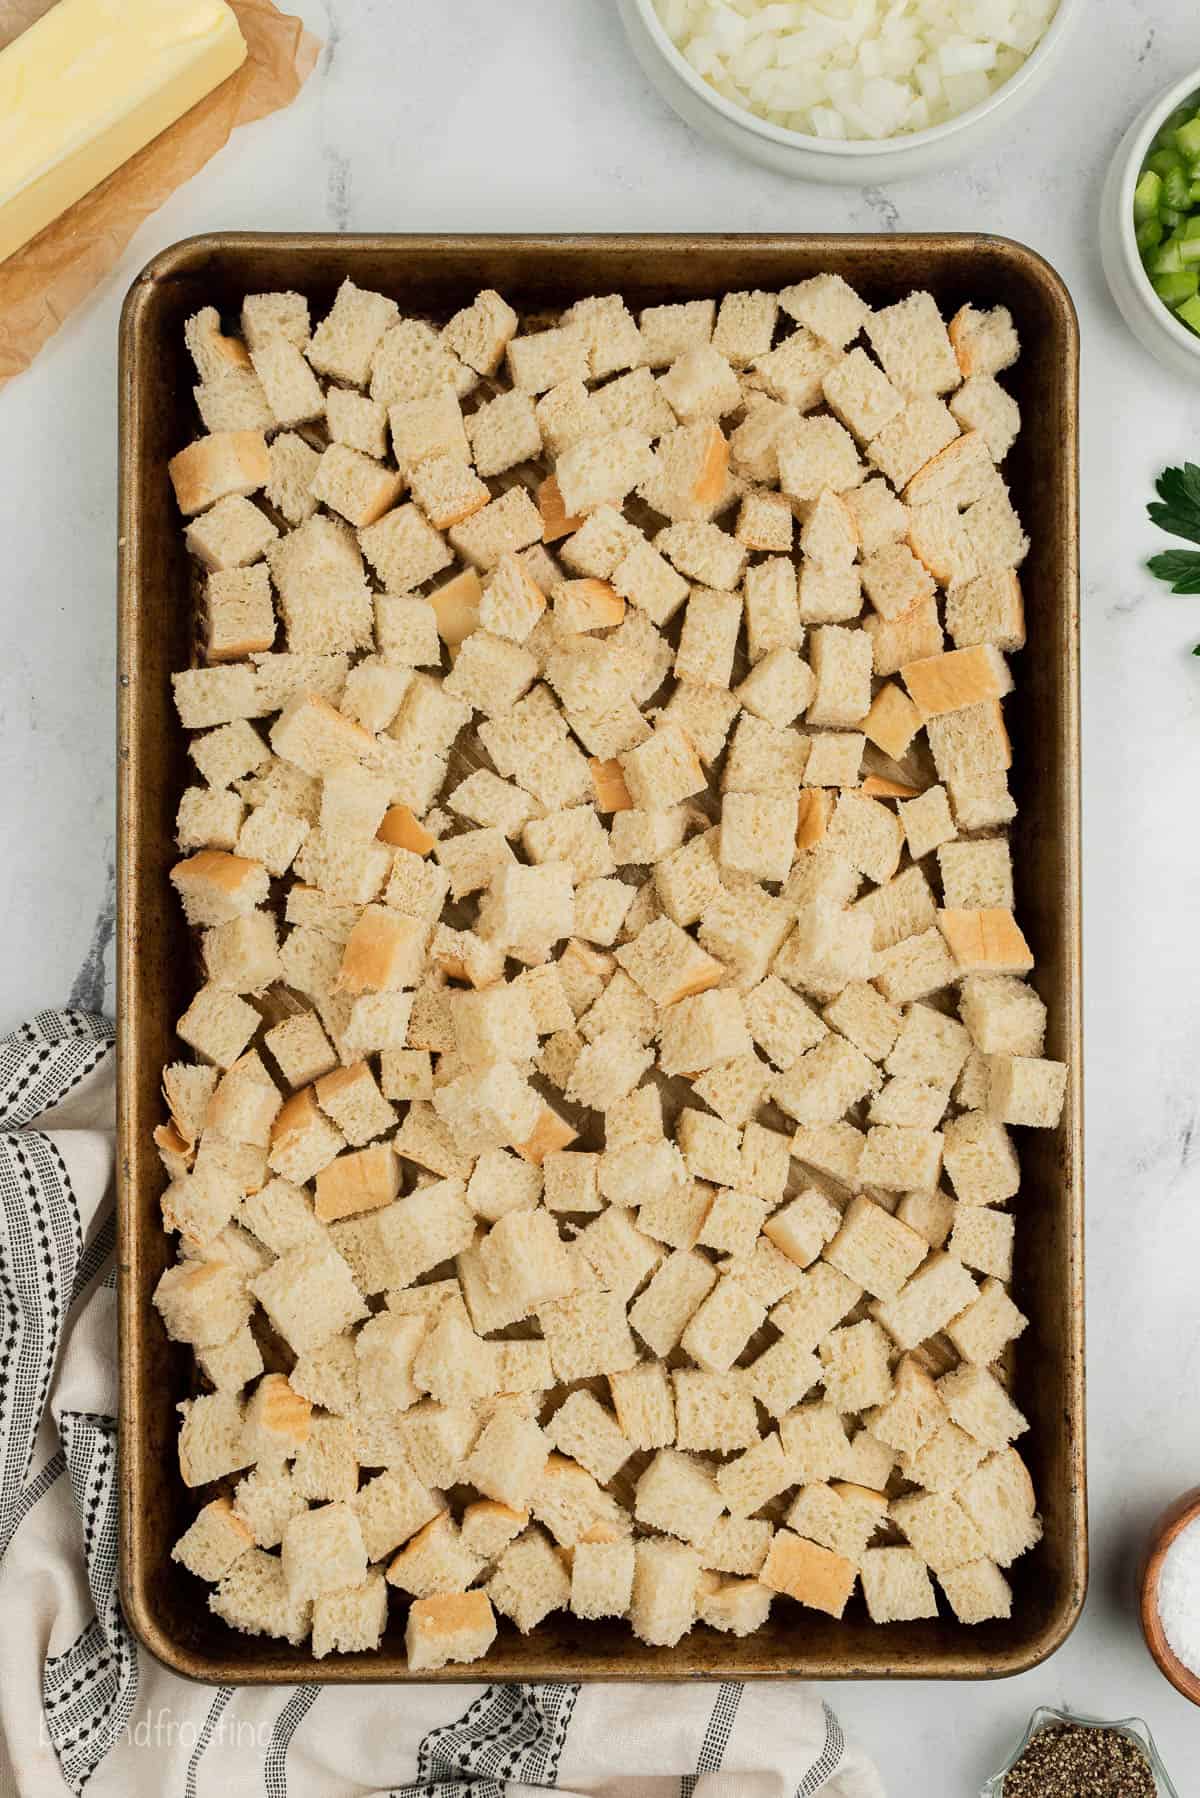 A baking sheet full of sourdough bread cubes on top of a counter with a kitchen towel, a stick of butter and some chopped veggies